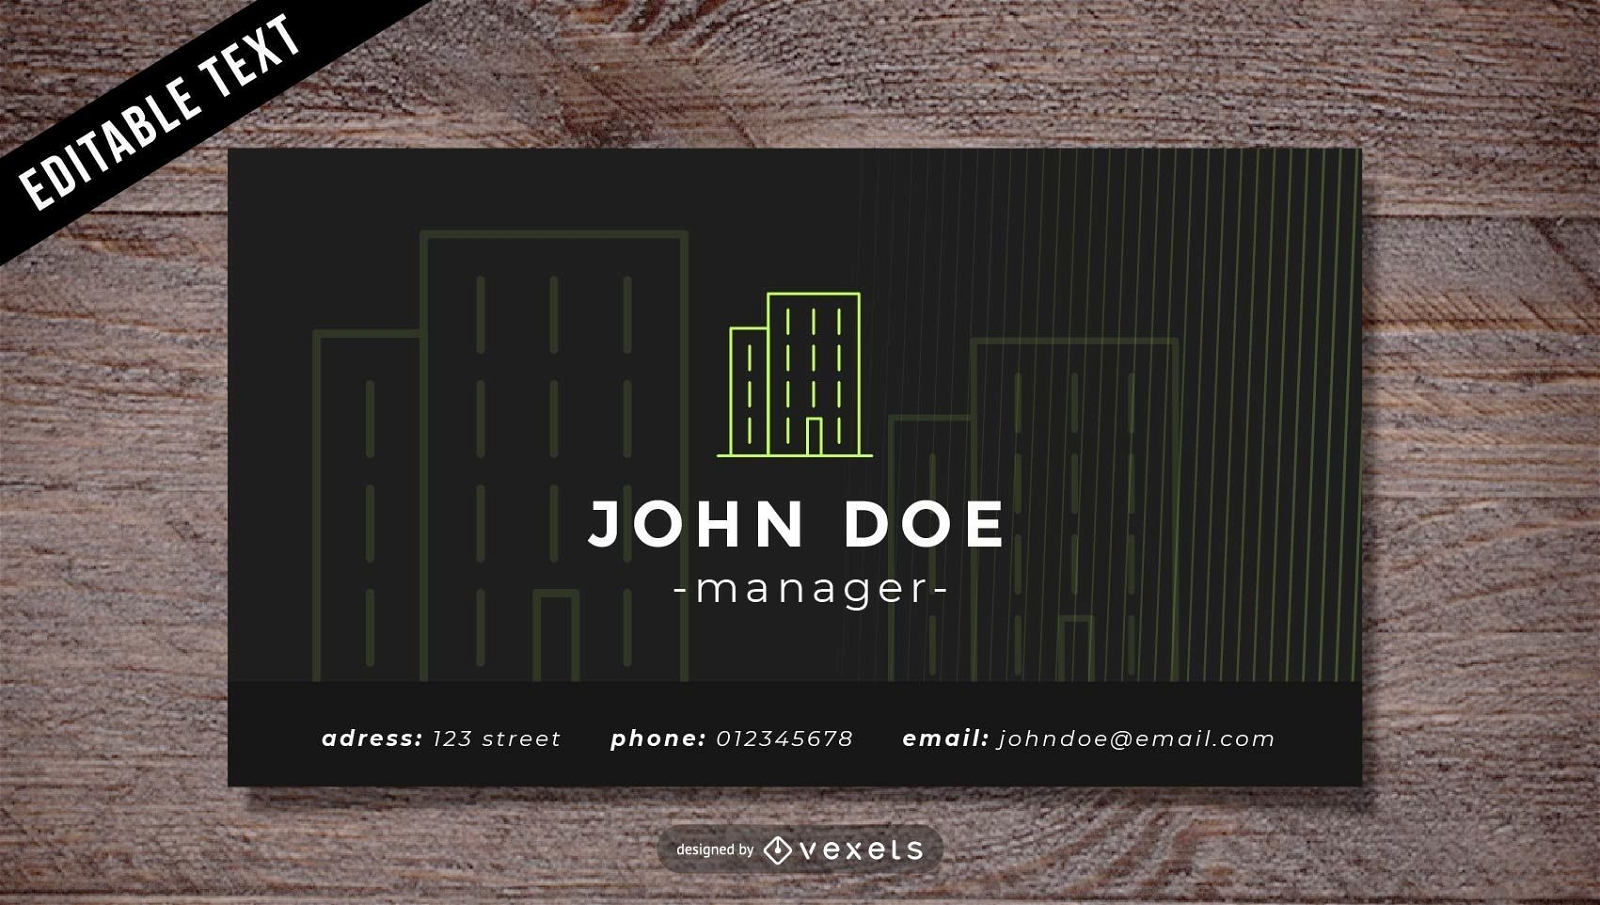 Editable Real Estate Business Card